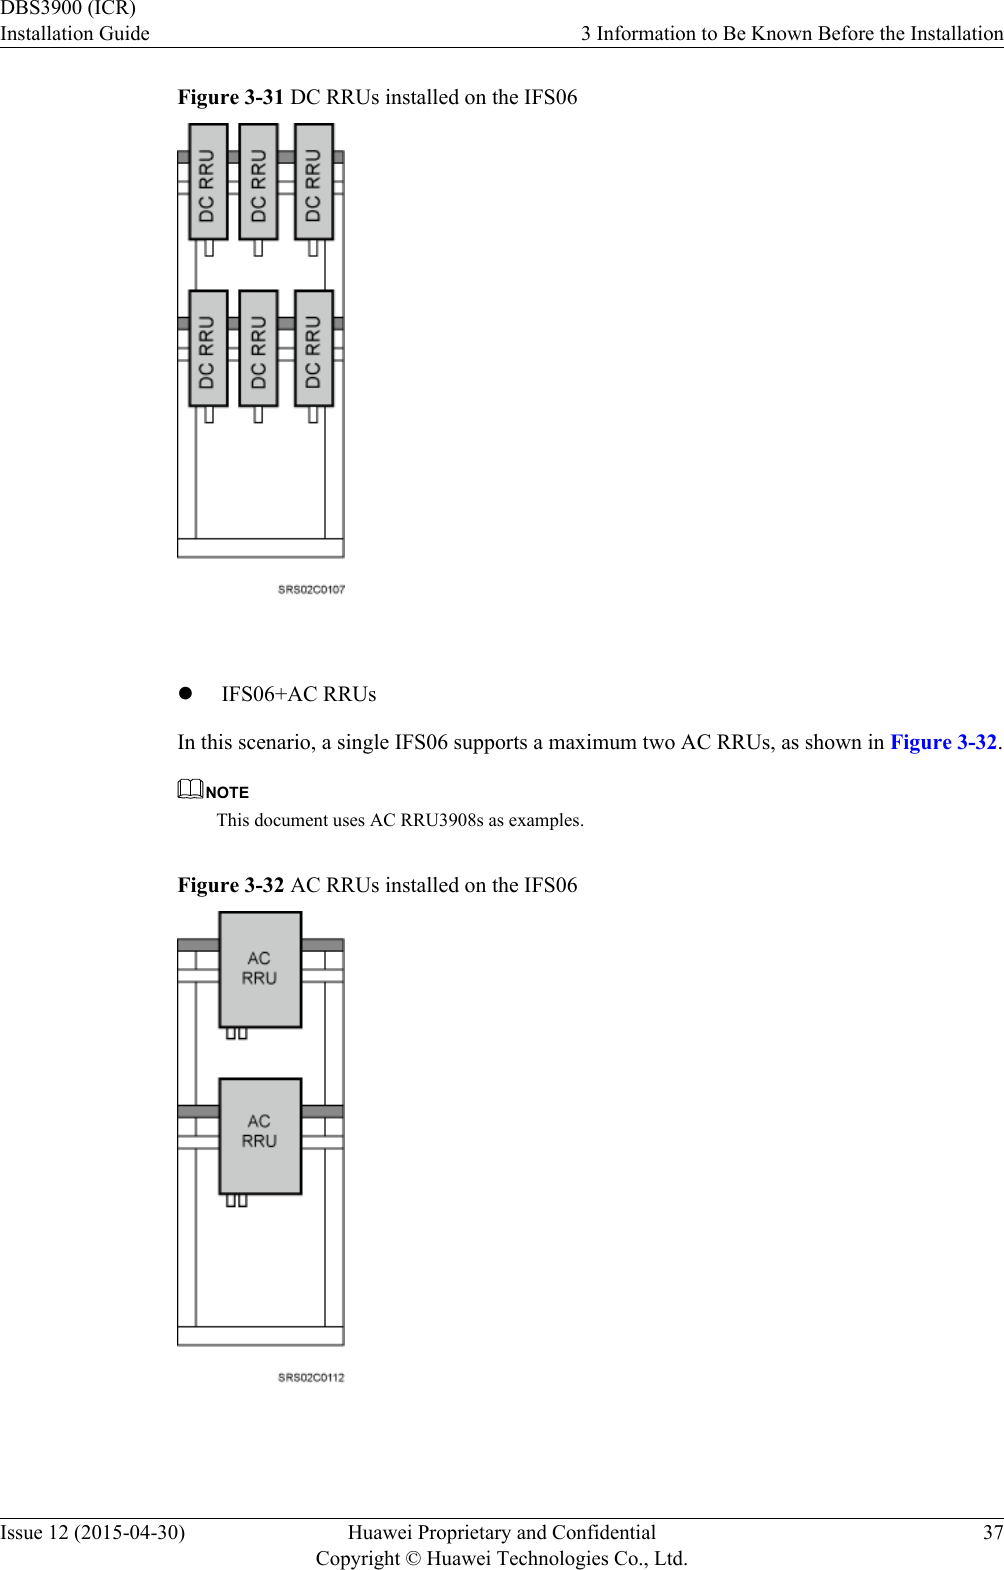 Figure 3-31 DC RRUs installed on the IFS06 lIFS06+AC RRUsIn this scenario, a single IFS06 supports a maximum two AC RRUs, as shown in Figure 3-32.NOTEThis document uses AC RRU3908s as examples.Figure 3-32 AC RRUs installed on the IFS06 DBS3900 (ICR)Installation Guide 3 Information to Be Known Before the InstallationIssue 12 (2015-04-30) Huawei Proprietary and ConfidentialCopyright © Huawei Technologies Co., Ltd.37